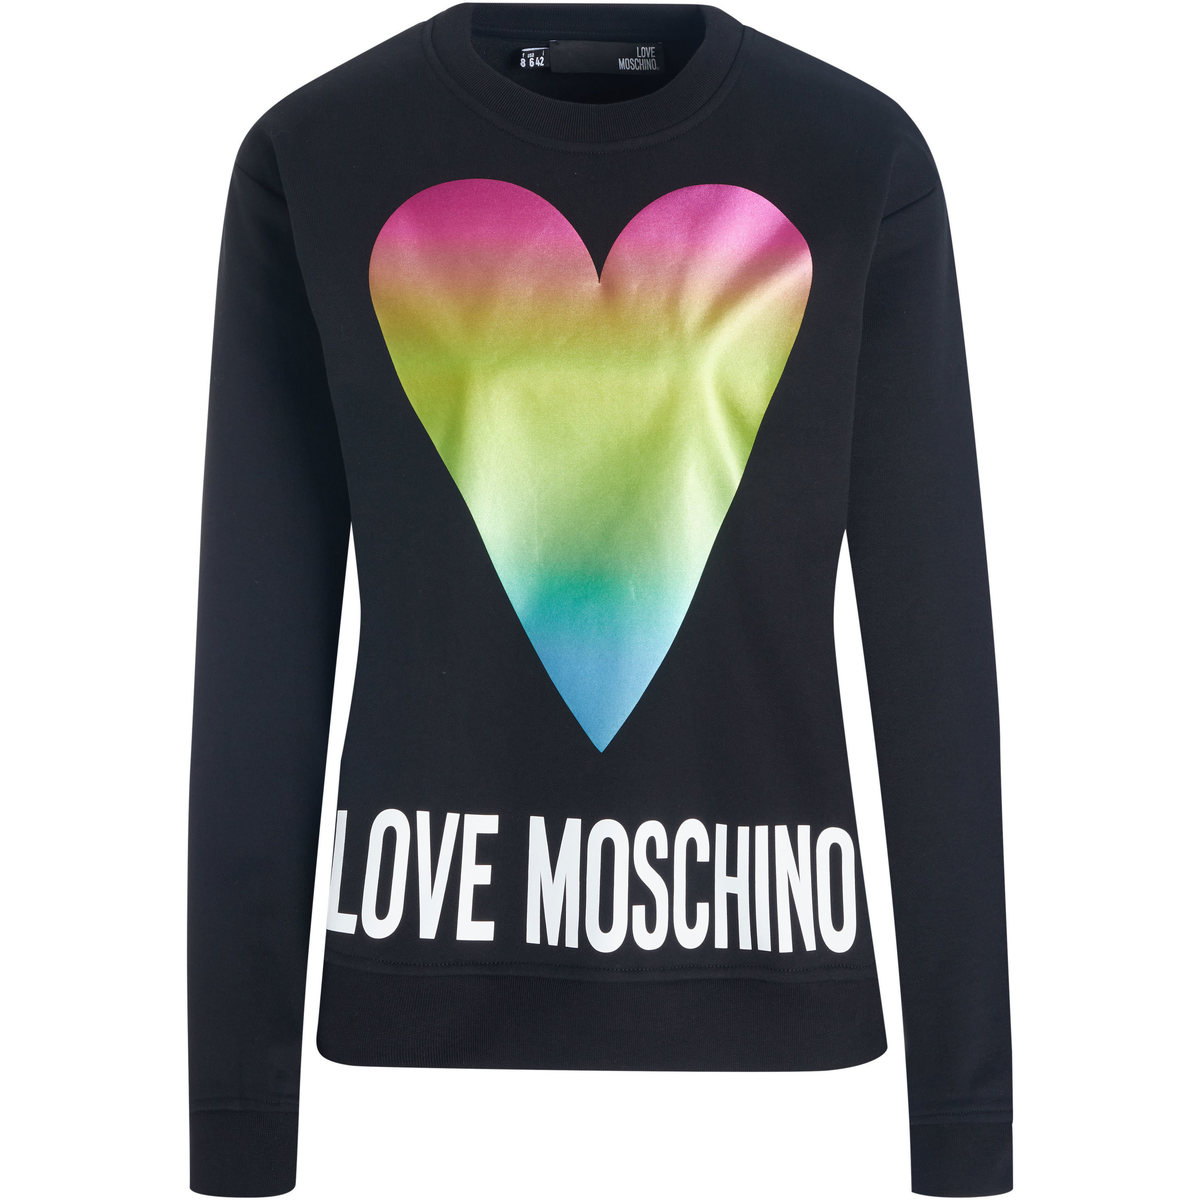 Love Moschino Noir Pull-over yPxzqUQt